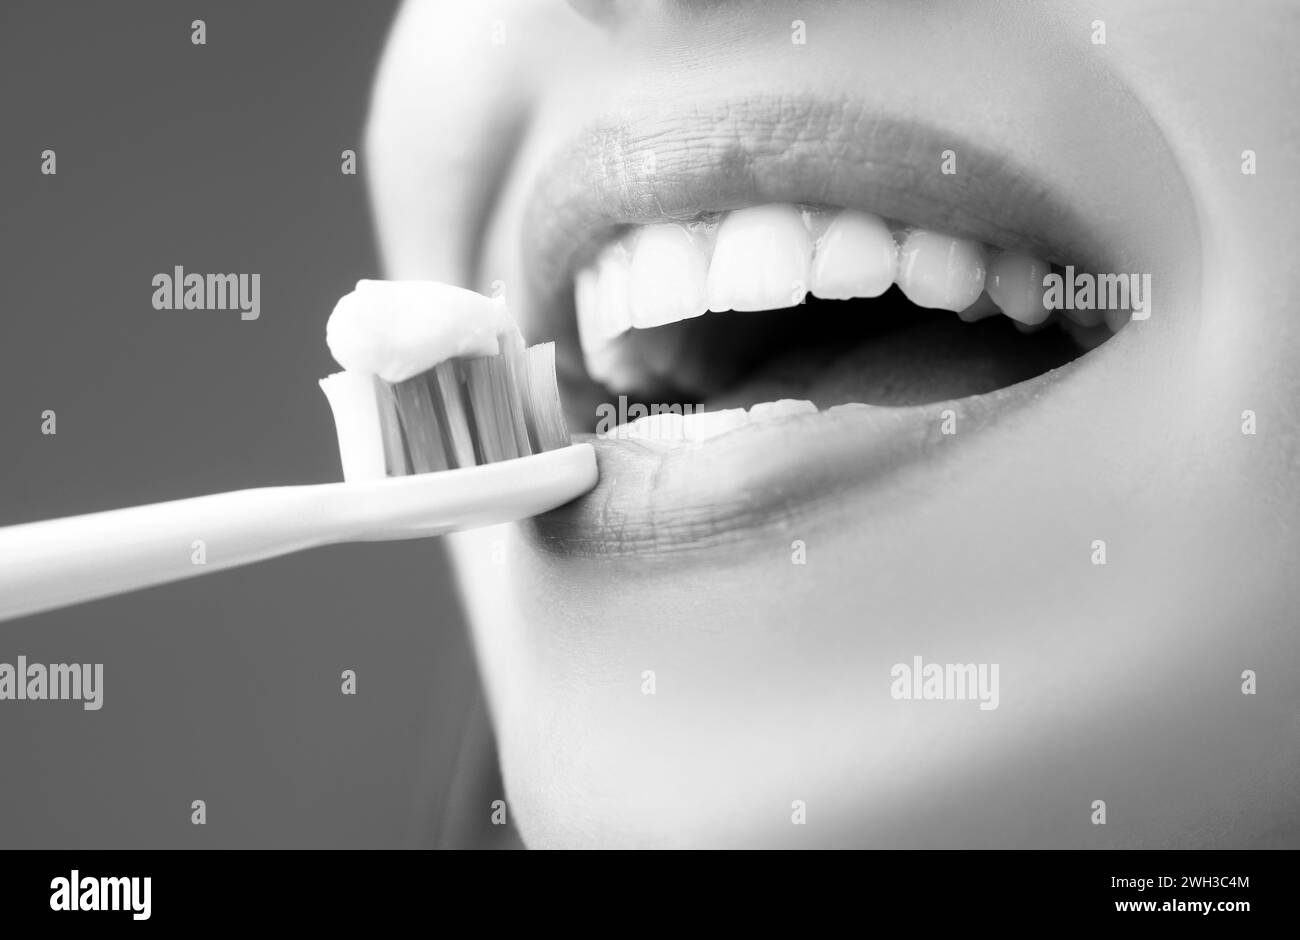 Beautiful smile with healthy teeth linear icon. Thin line